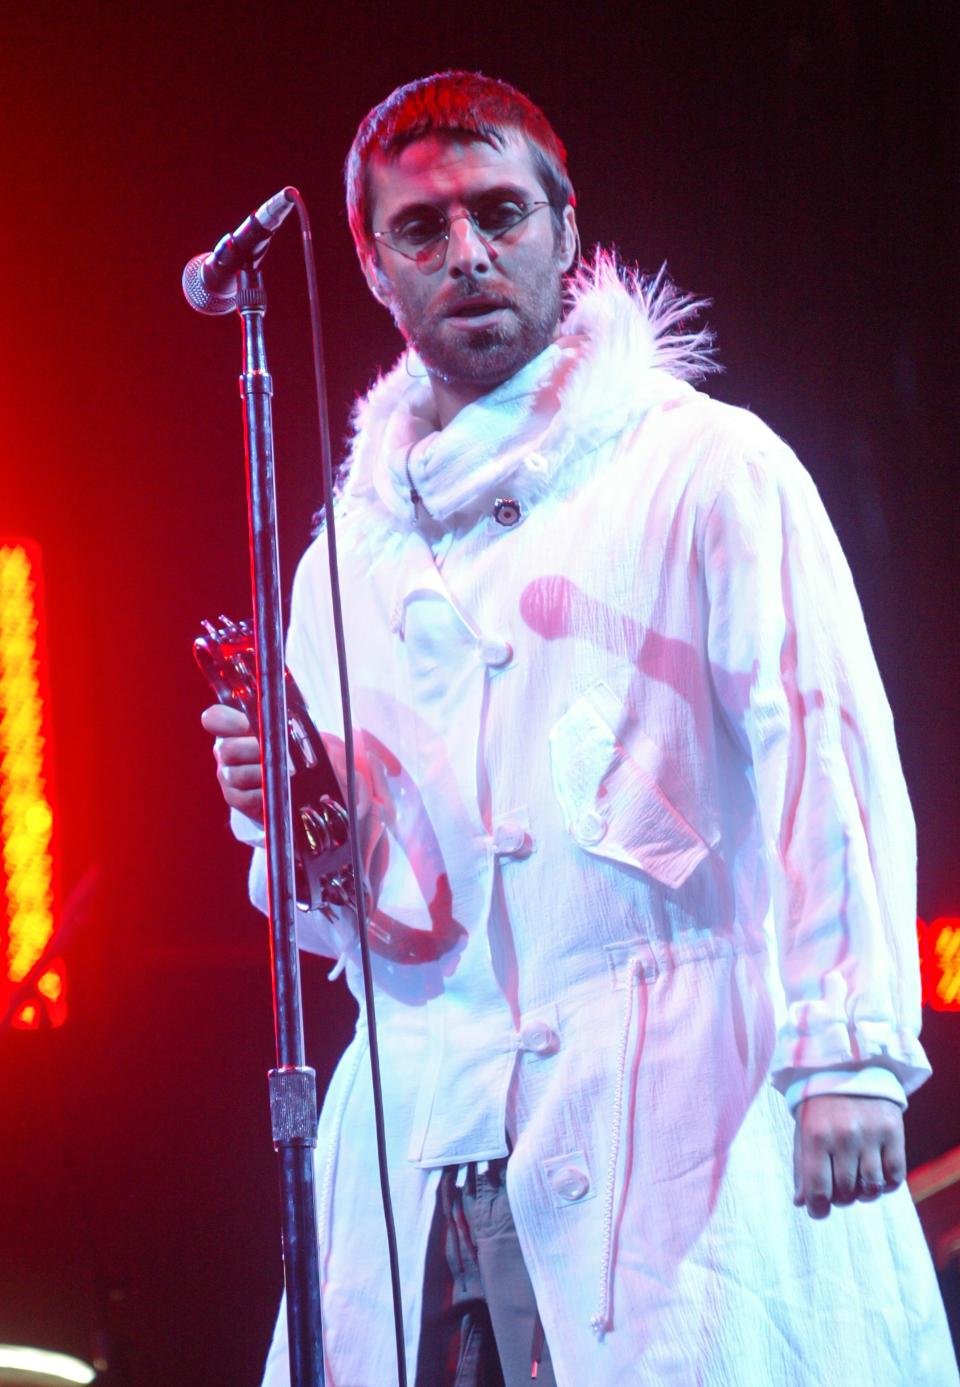 Liam Gallagher of Oasis performs on the Pyramid Stage during the 2004 Glastonbury Festival.